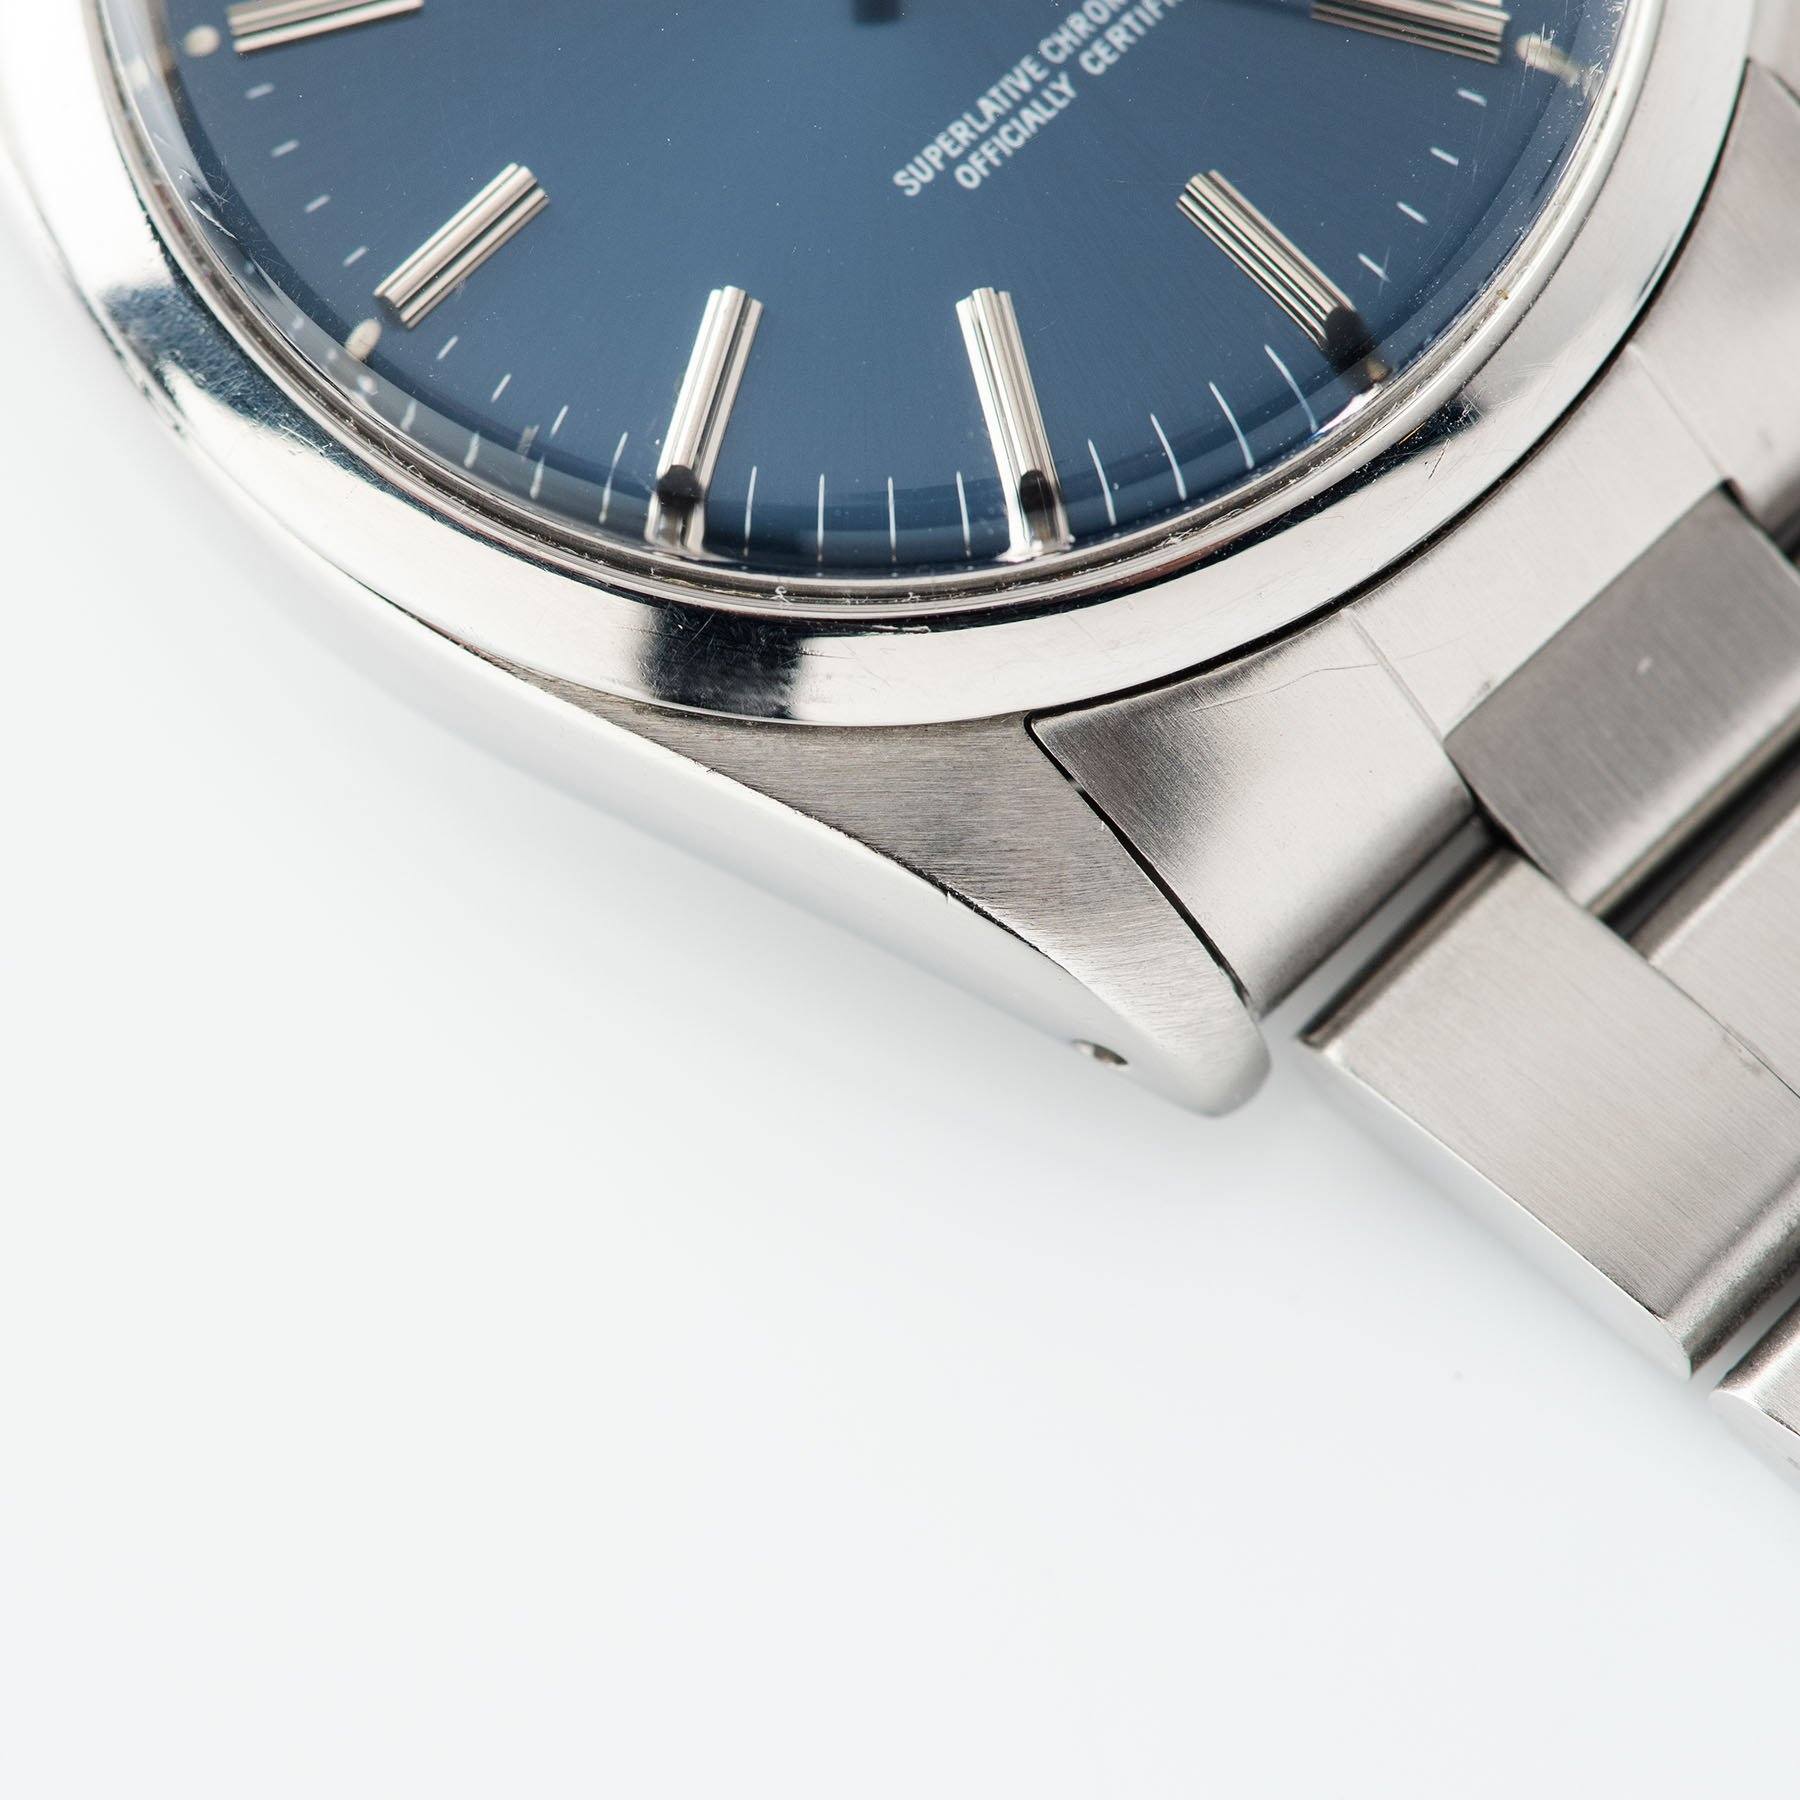 Rolex OP Date Reference 1500 Blue Dial